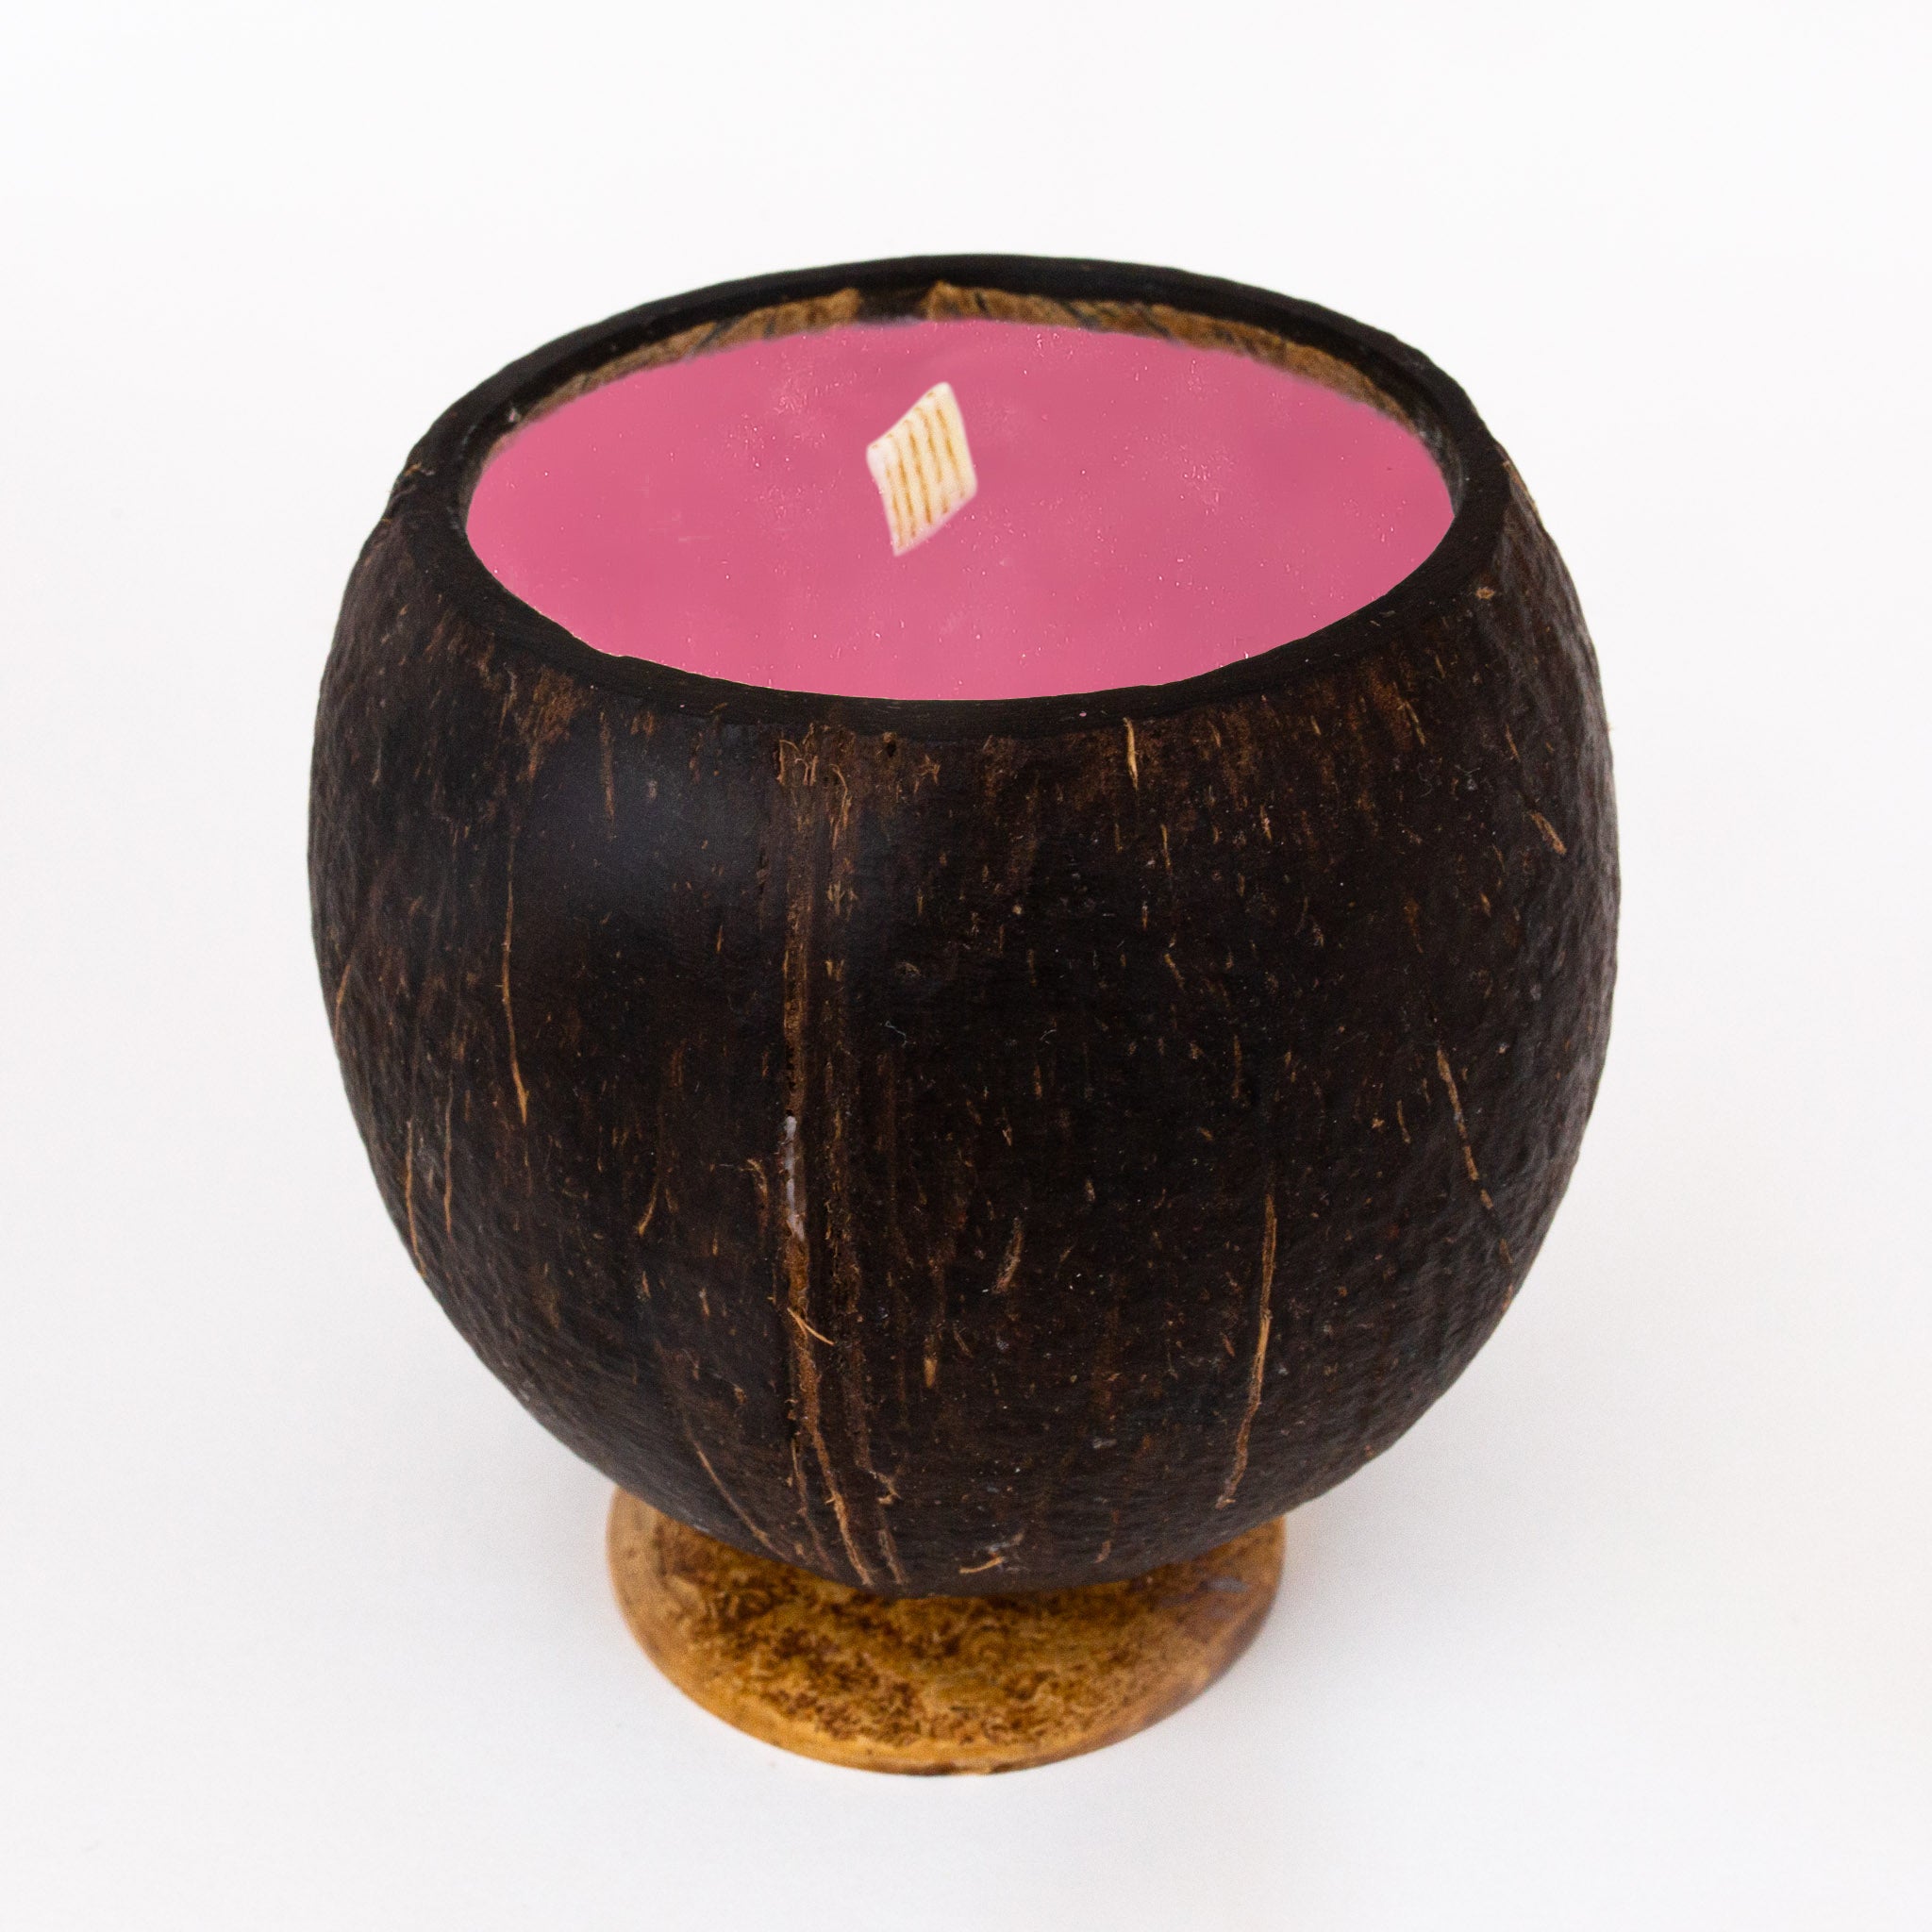 Whole Coconut Candle - Cranberry Spice